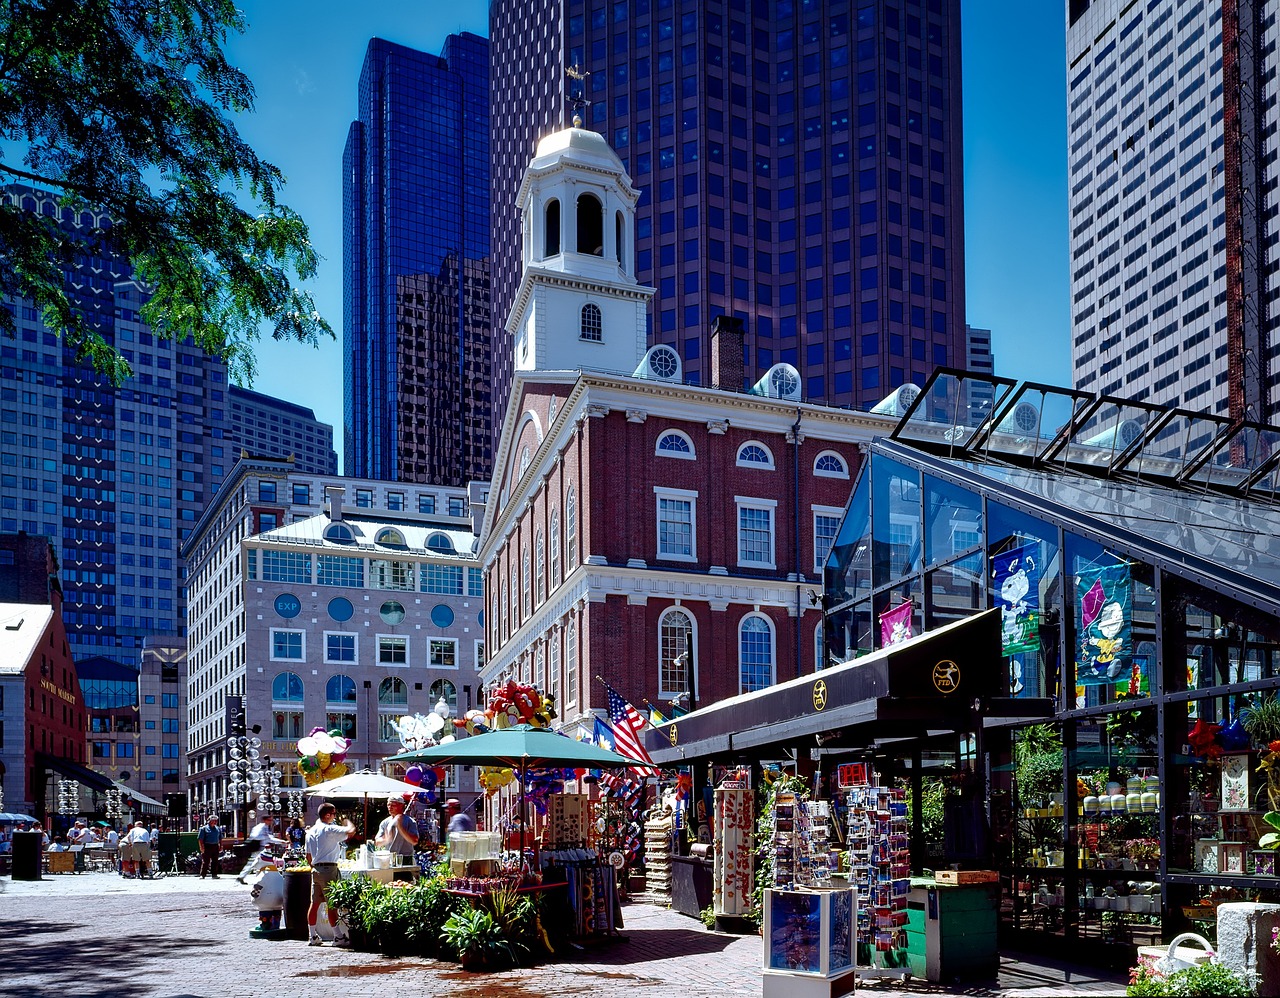 Historical Landmarks and Culinary Delights in Boston